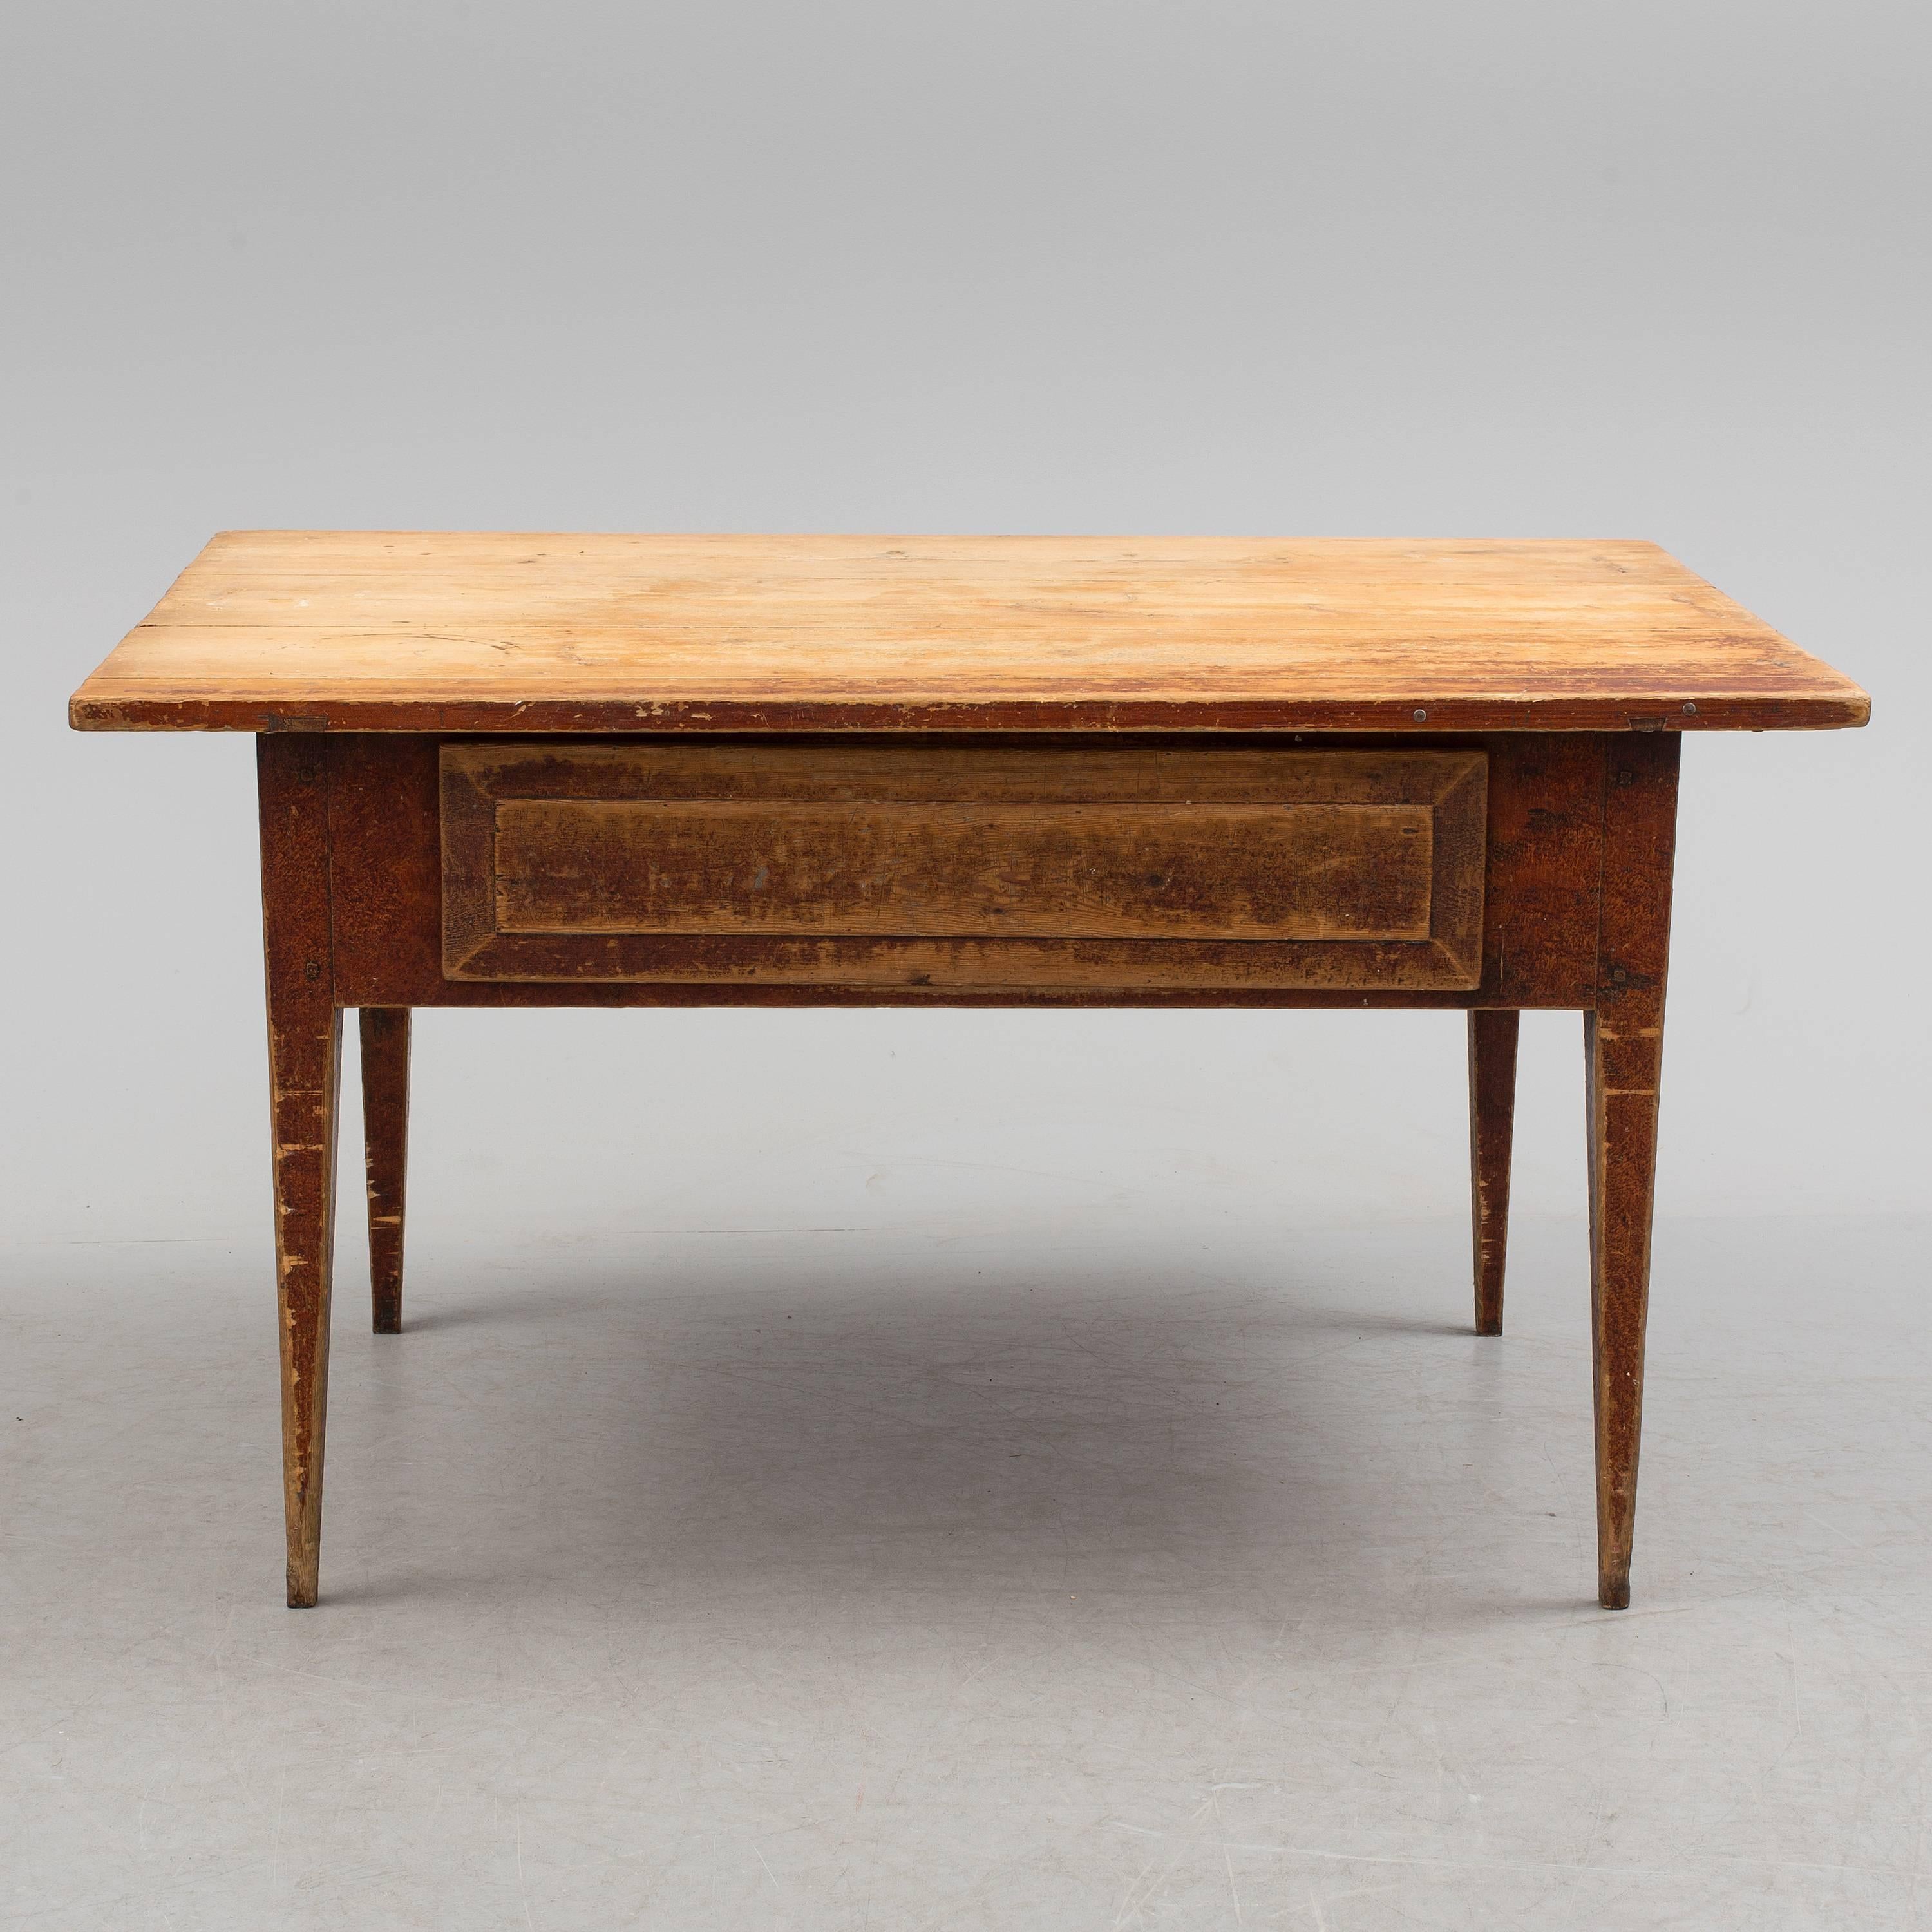 Swedish Folk Art table with large drawer and old patina, from mid-18th century.